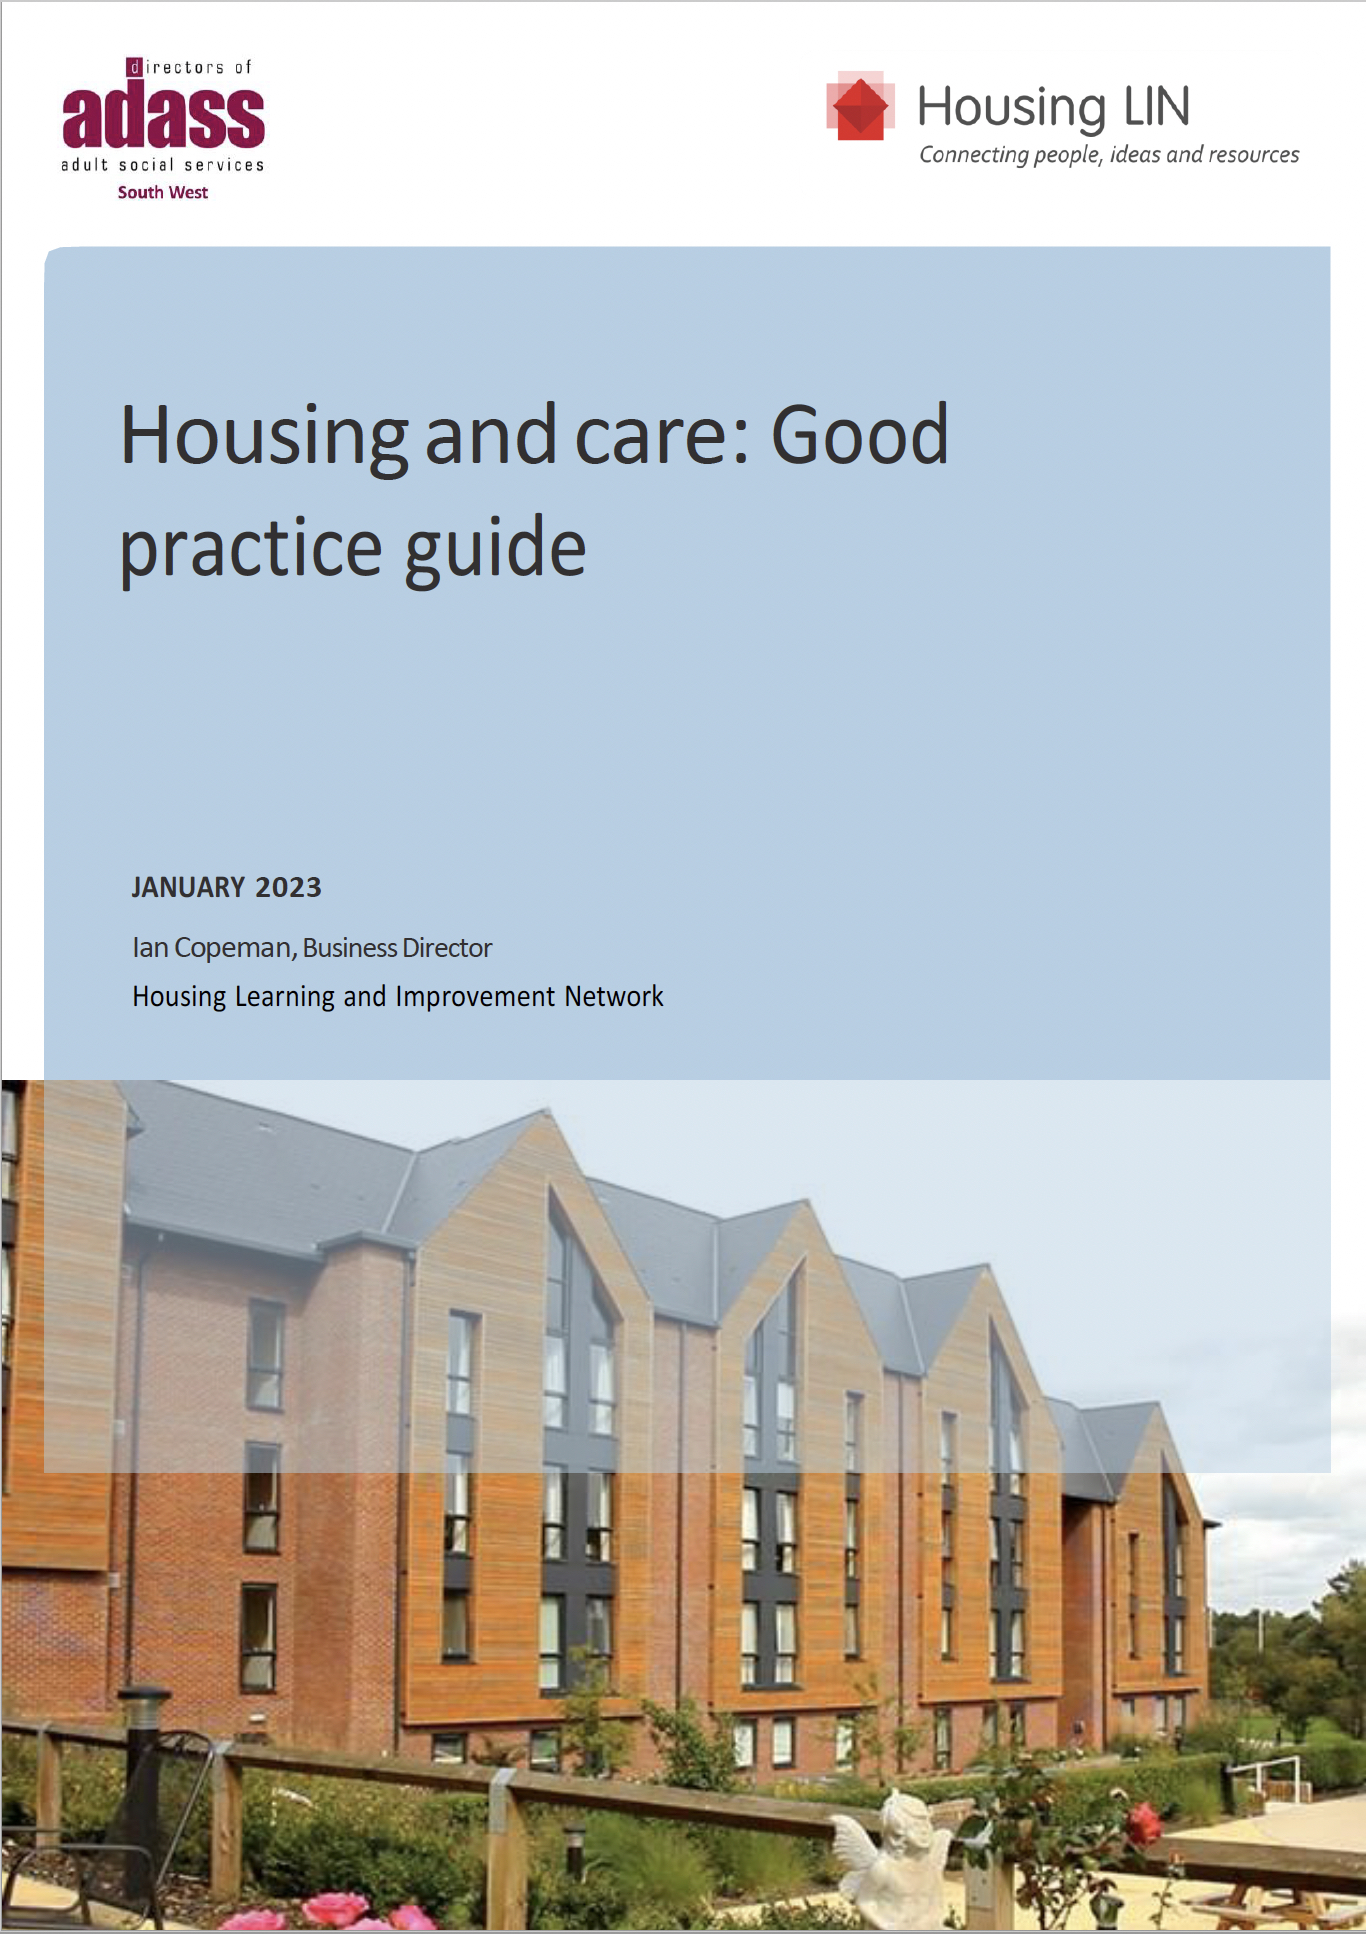 Housing and Care – new good practice guide launched